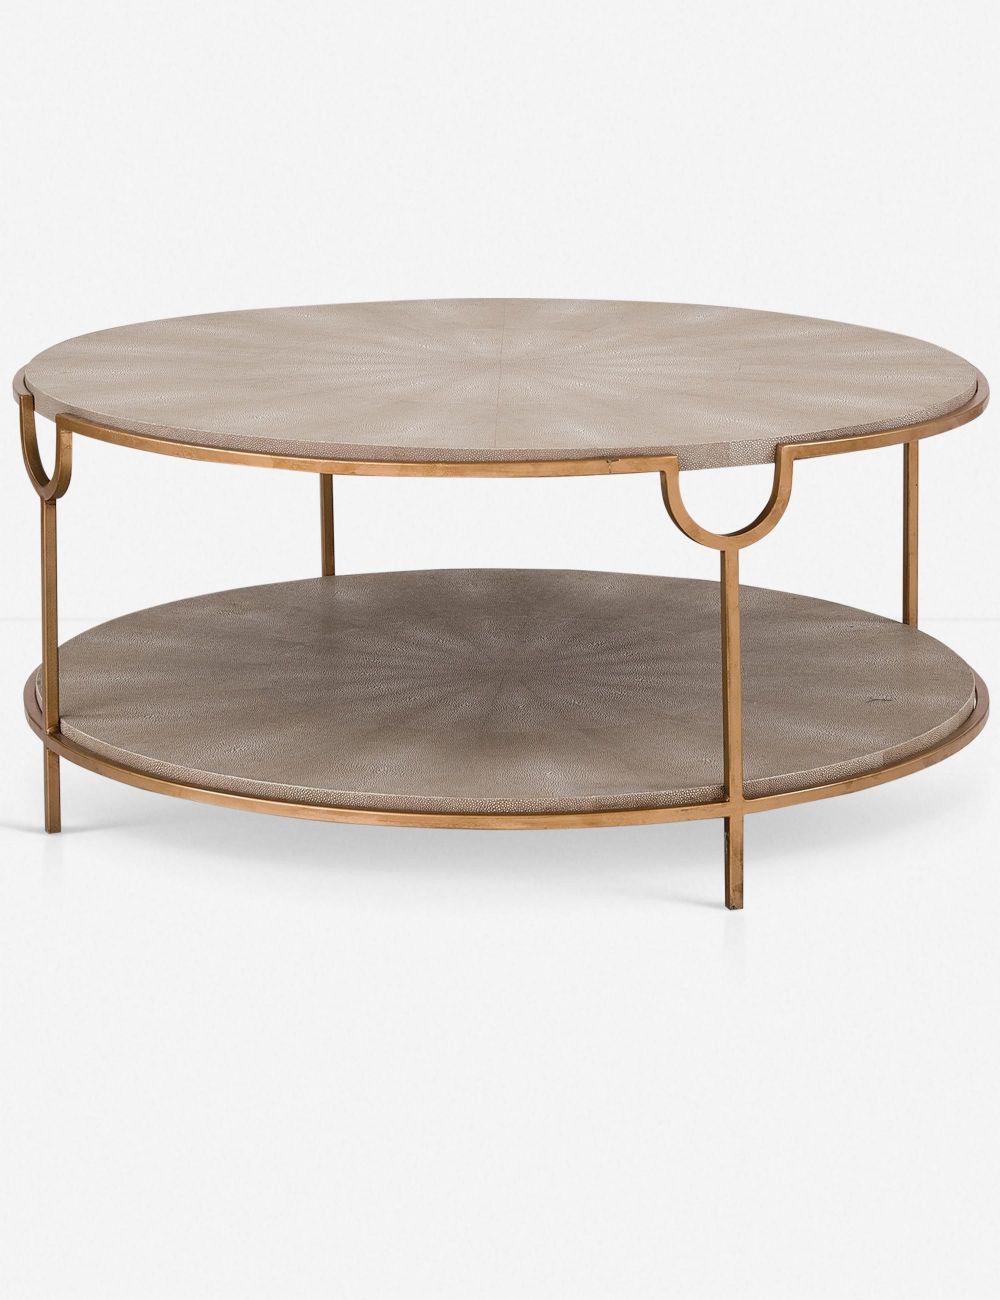 Trendy Faux Shagreen Coffee Tables Intended For Faux Shagreen Texture Mixed With A Captivating Gold Base (View 2 of 20)